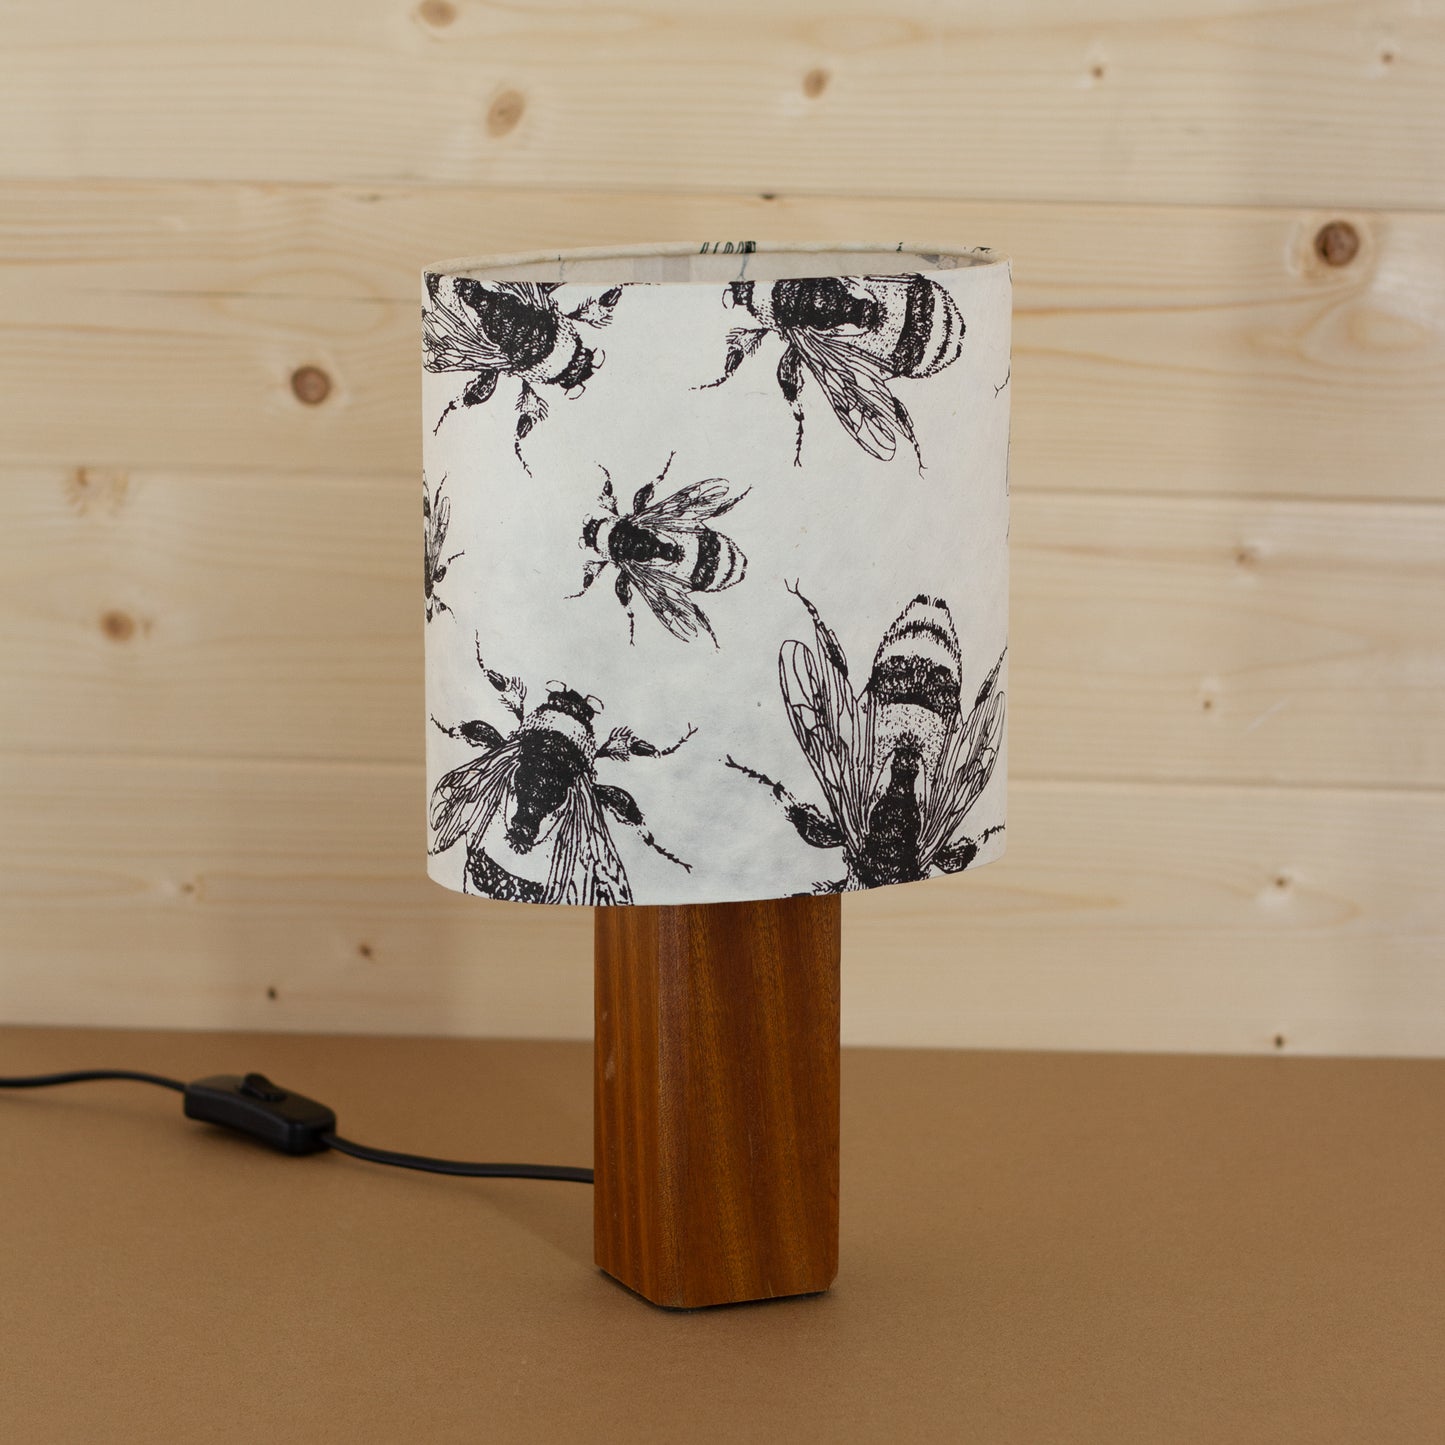 Square Sapele Table Lamp with Oval Lamp Shade P42 - Bees Screen Print